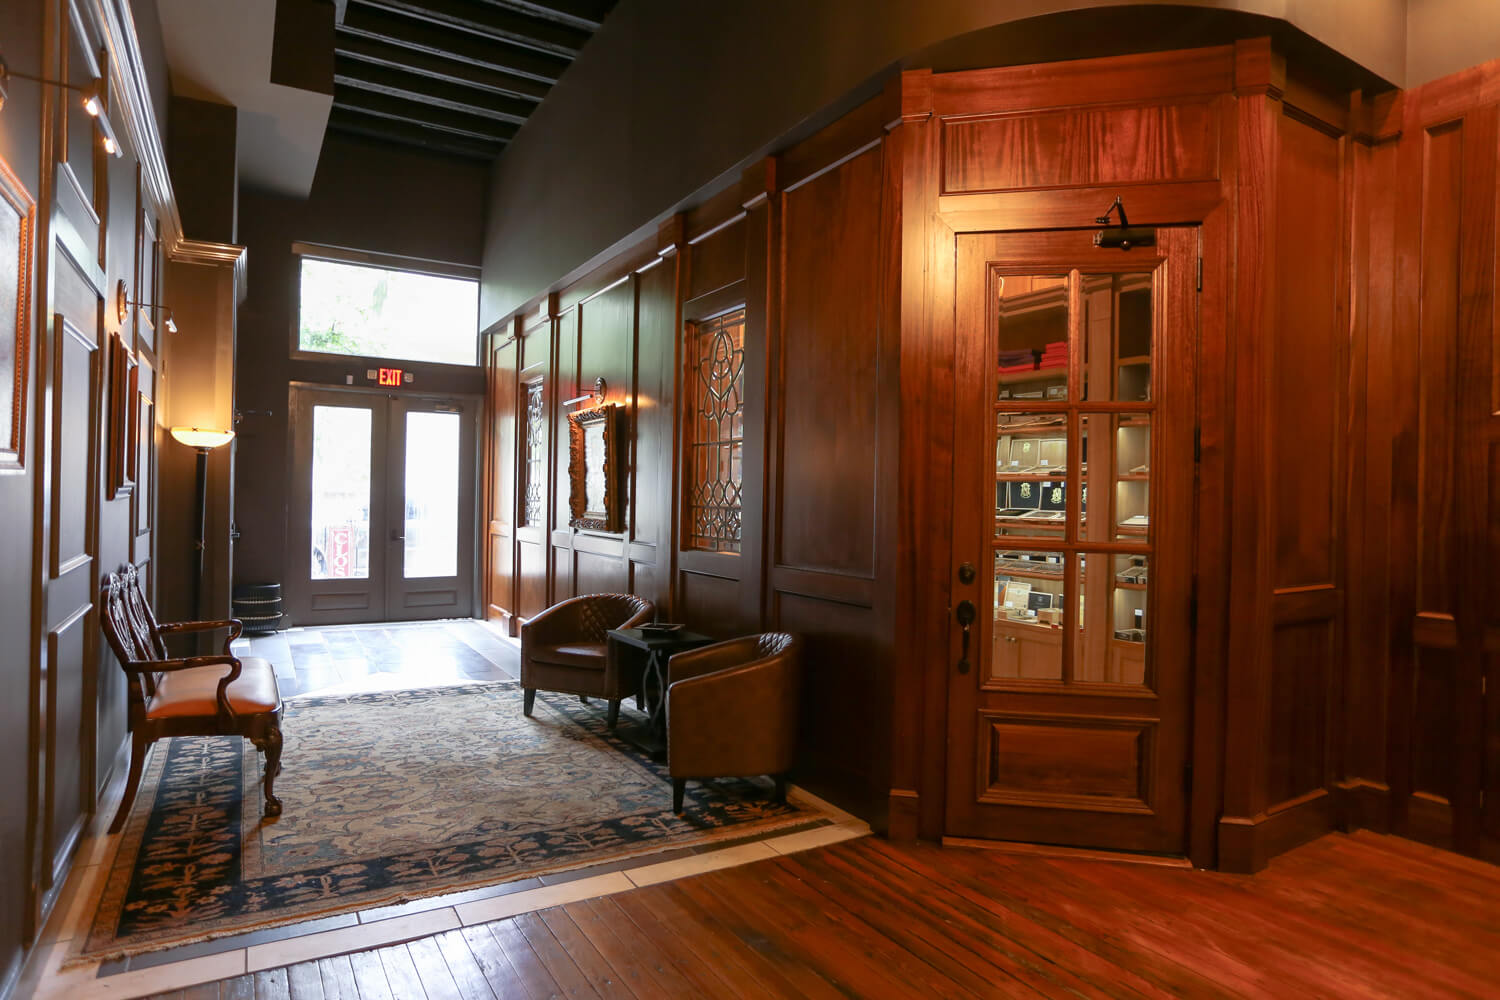 Cigar Store - Entrance - Designed by Foshee Architecture